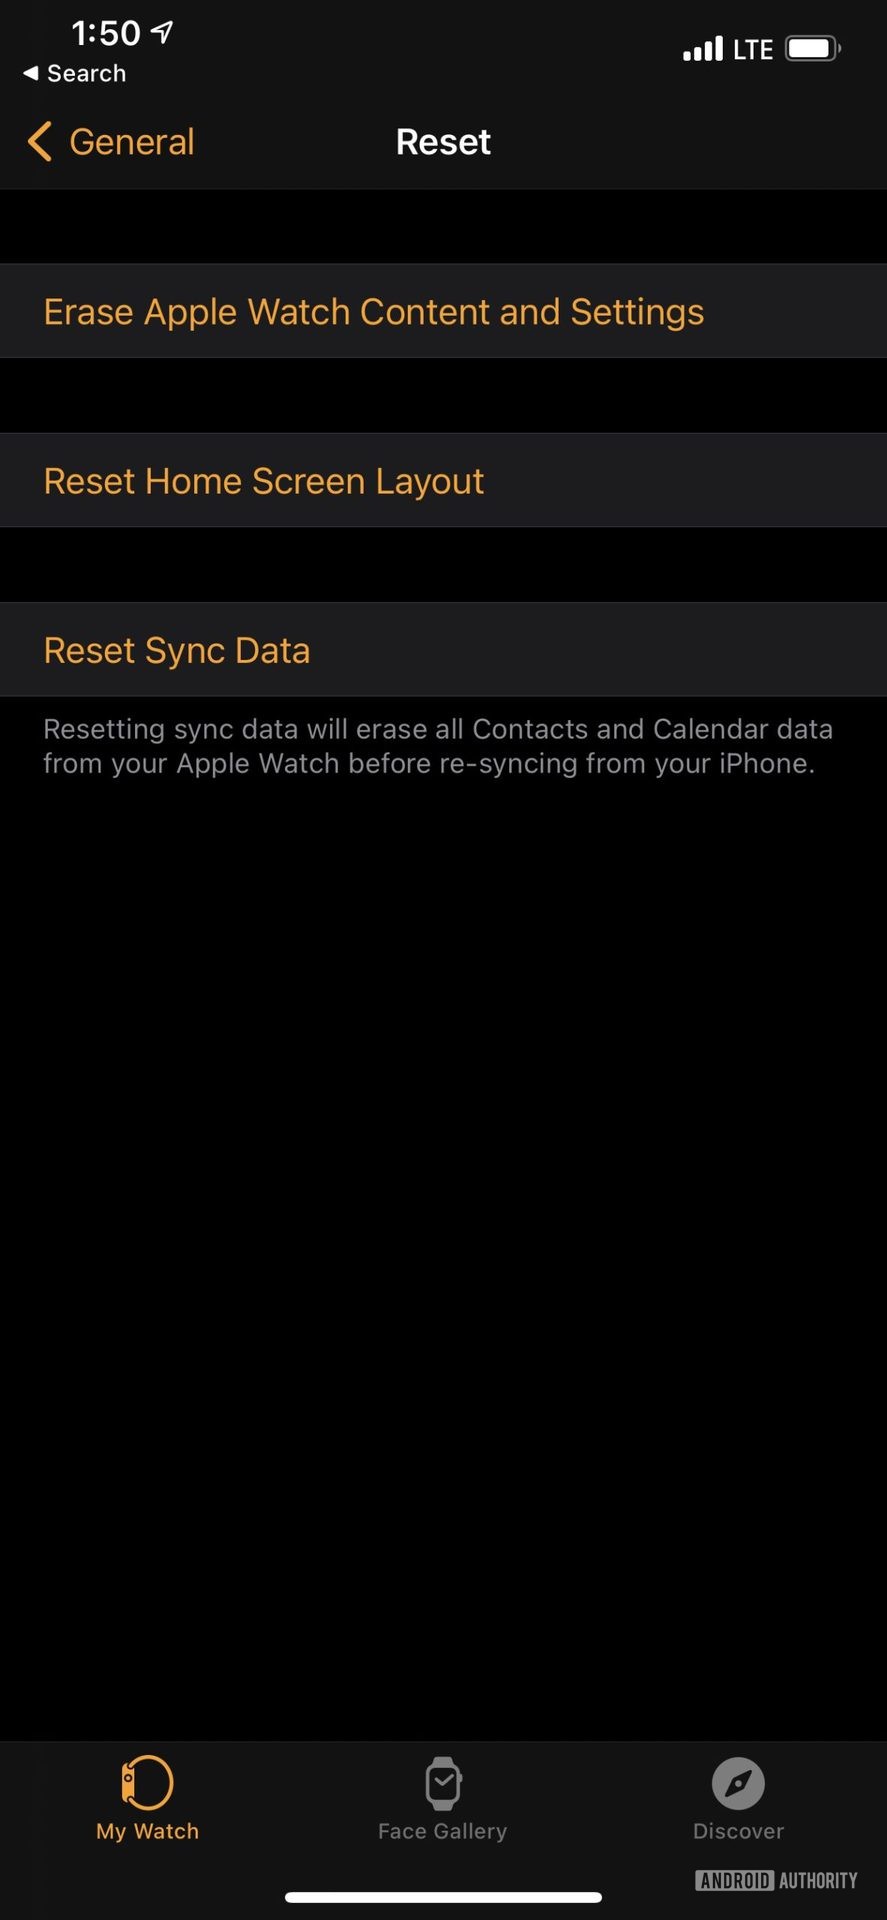 iPhone screenshot displays how to reset Apple Watch by choosing Erase Apple Watch Content and Settings